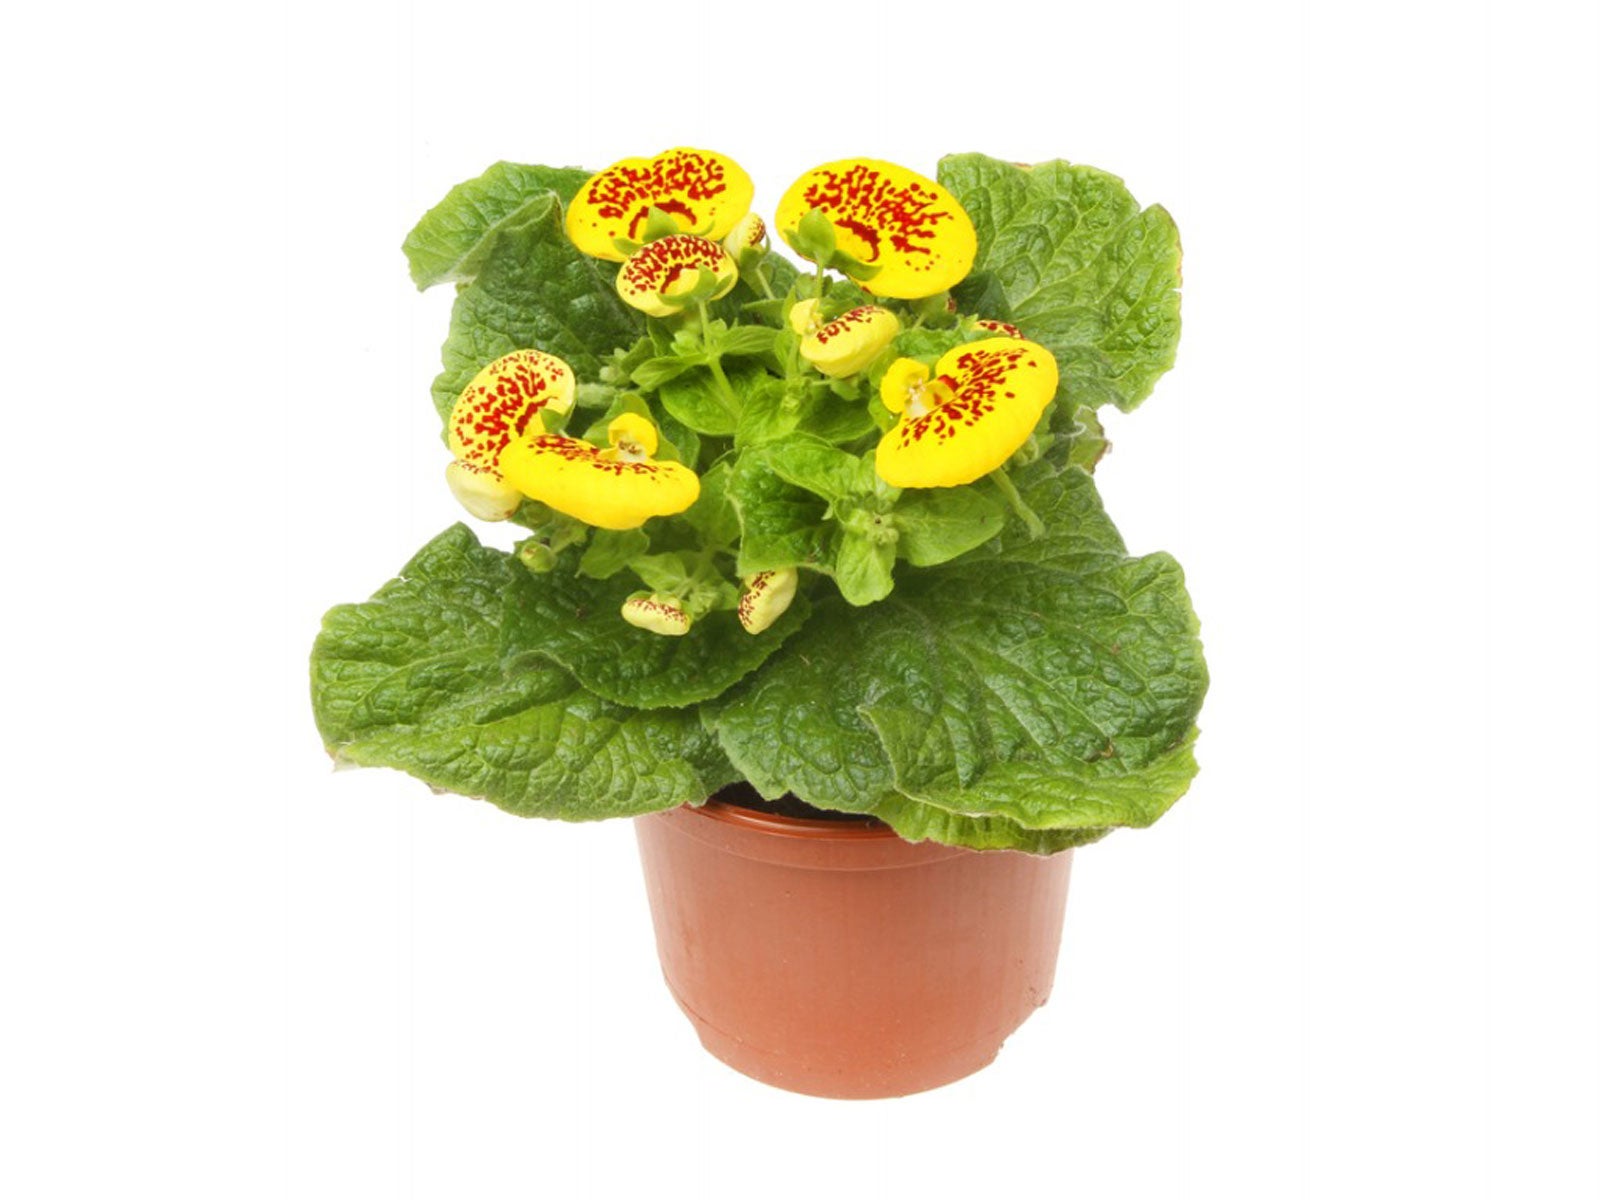 Flowers Ladys Purse Flower Calceolaria X Stock Photo 422716129 |  Shutterstock